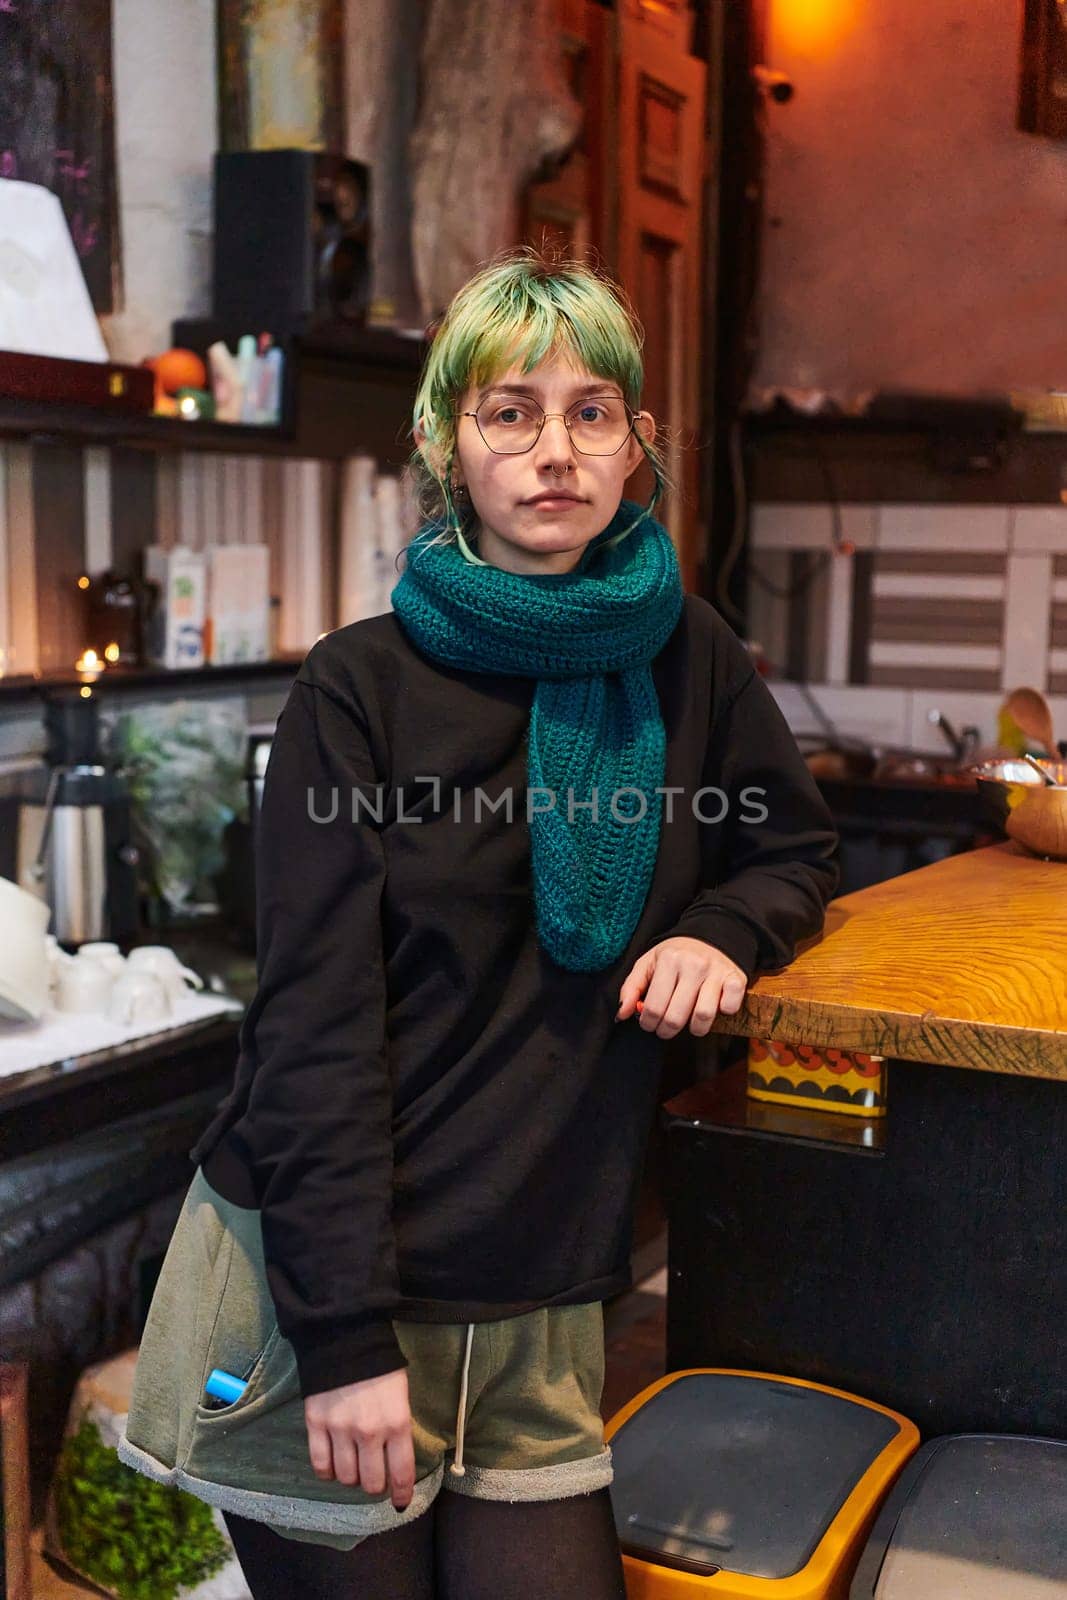 A modern and intriguing girl with striking blue hair enjoys a night out in a cafe transformed into a passionate Halloween-style setting, exuding a captivating and witchy ambiance.